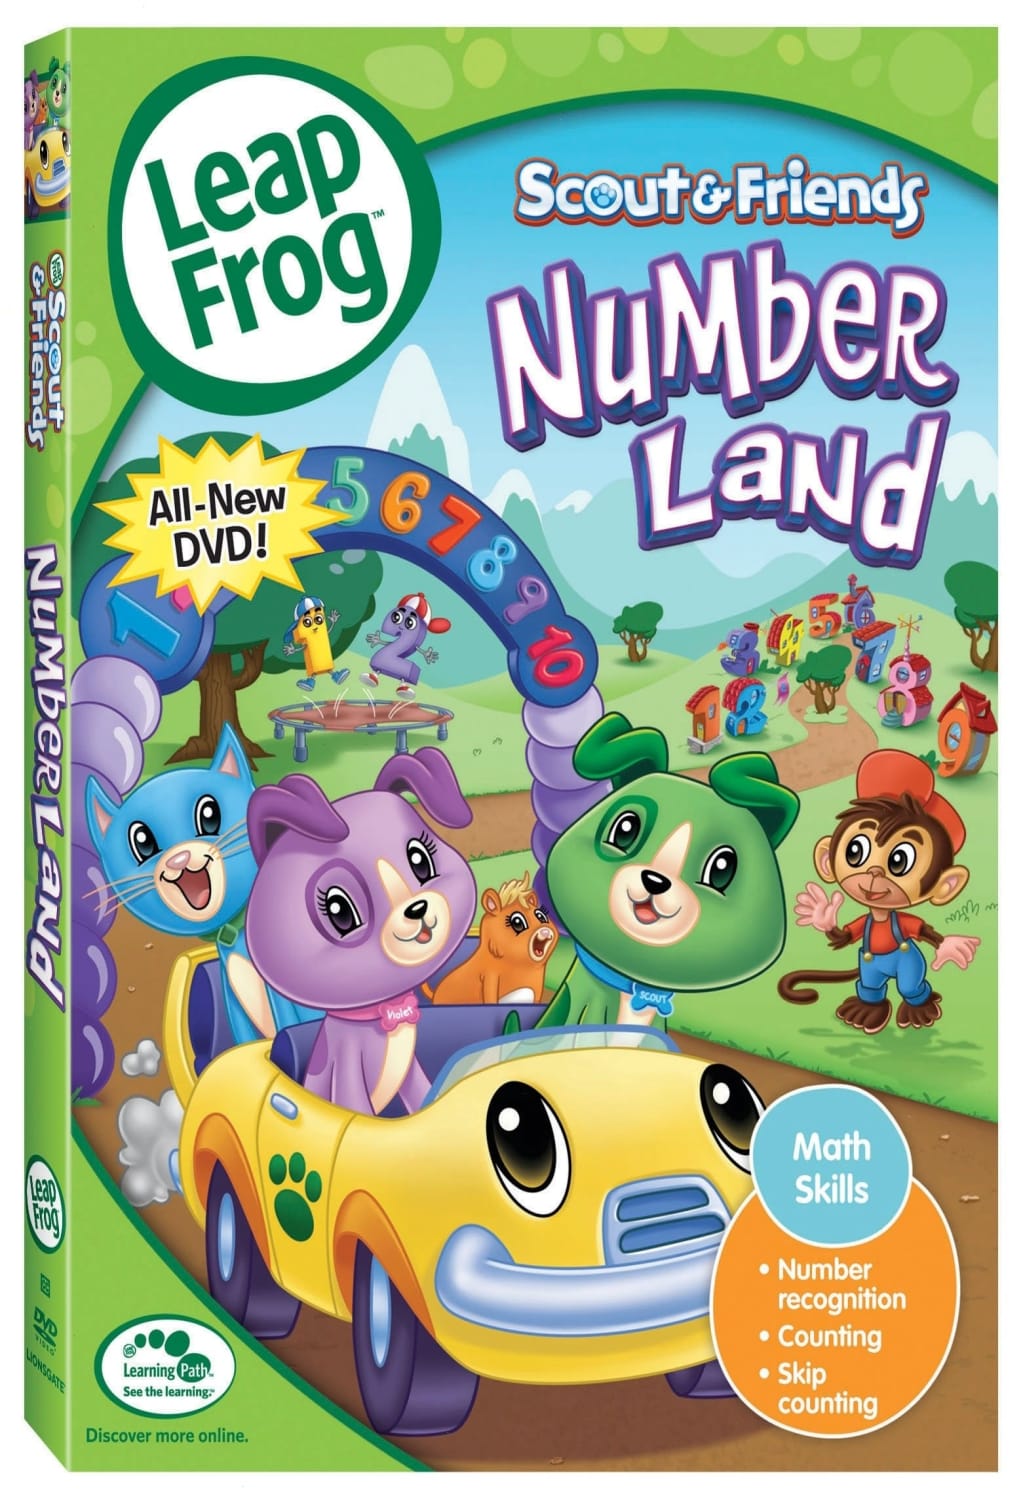 Leap Frog: Scout & Friends: Number Land (DVD) on MovieShack